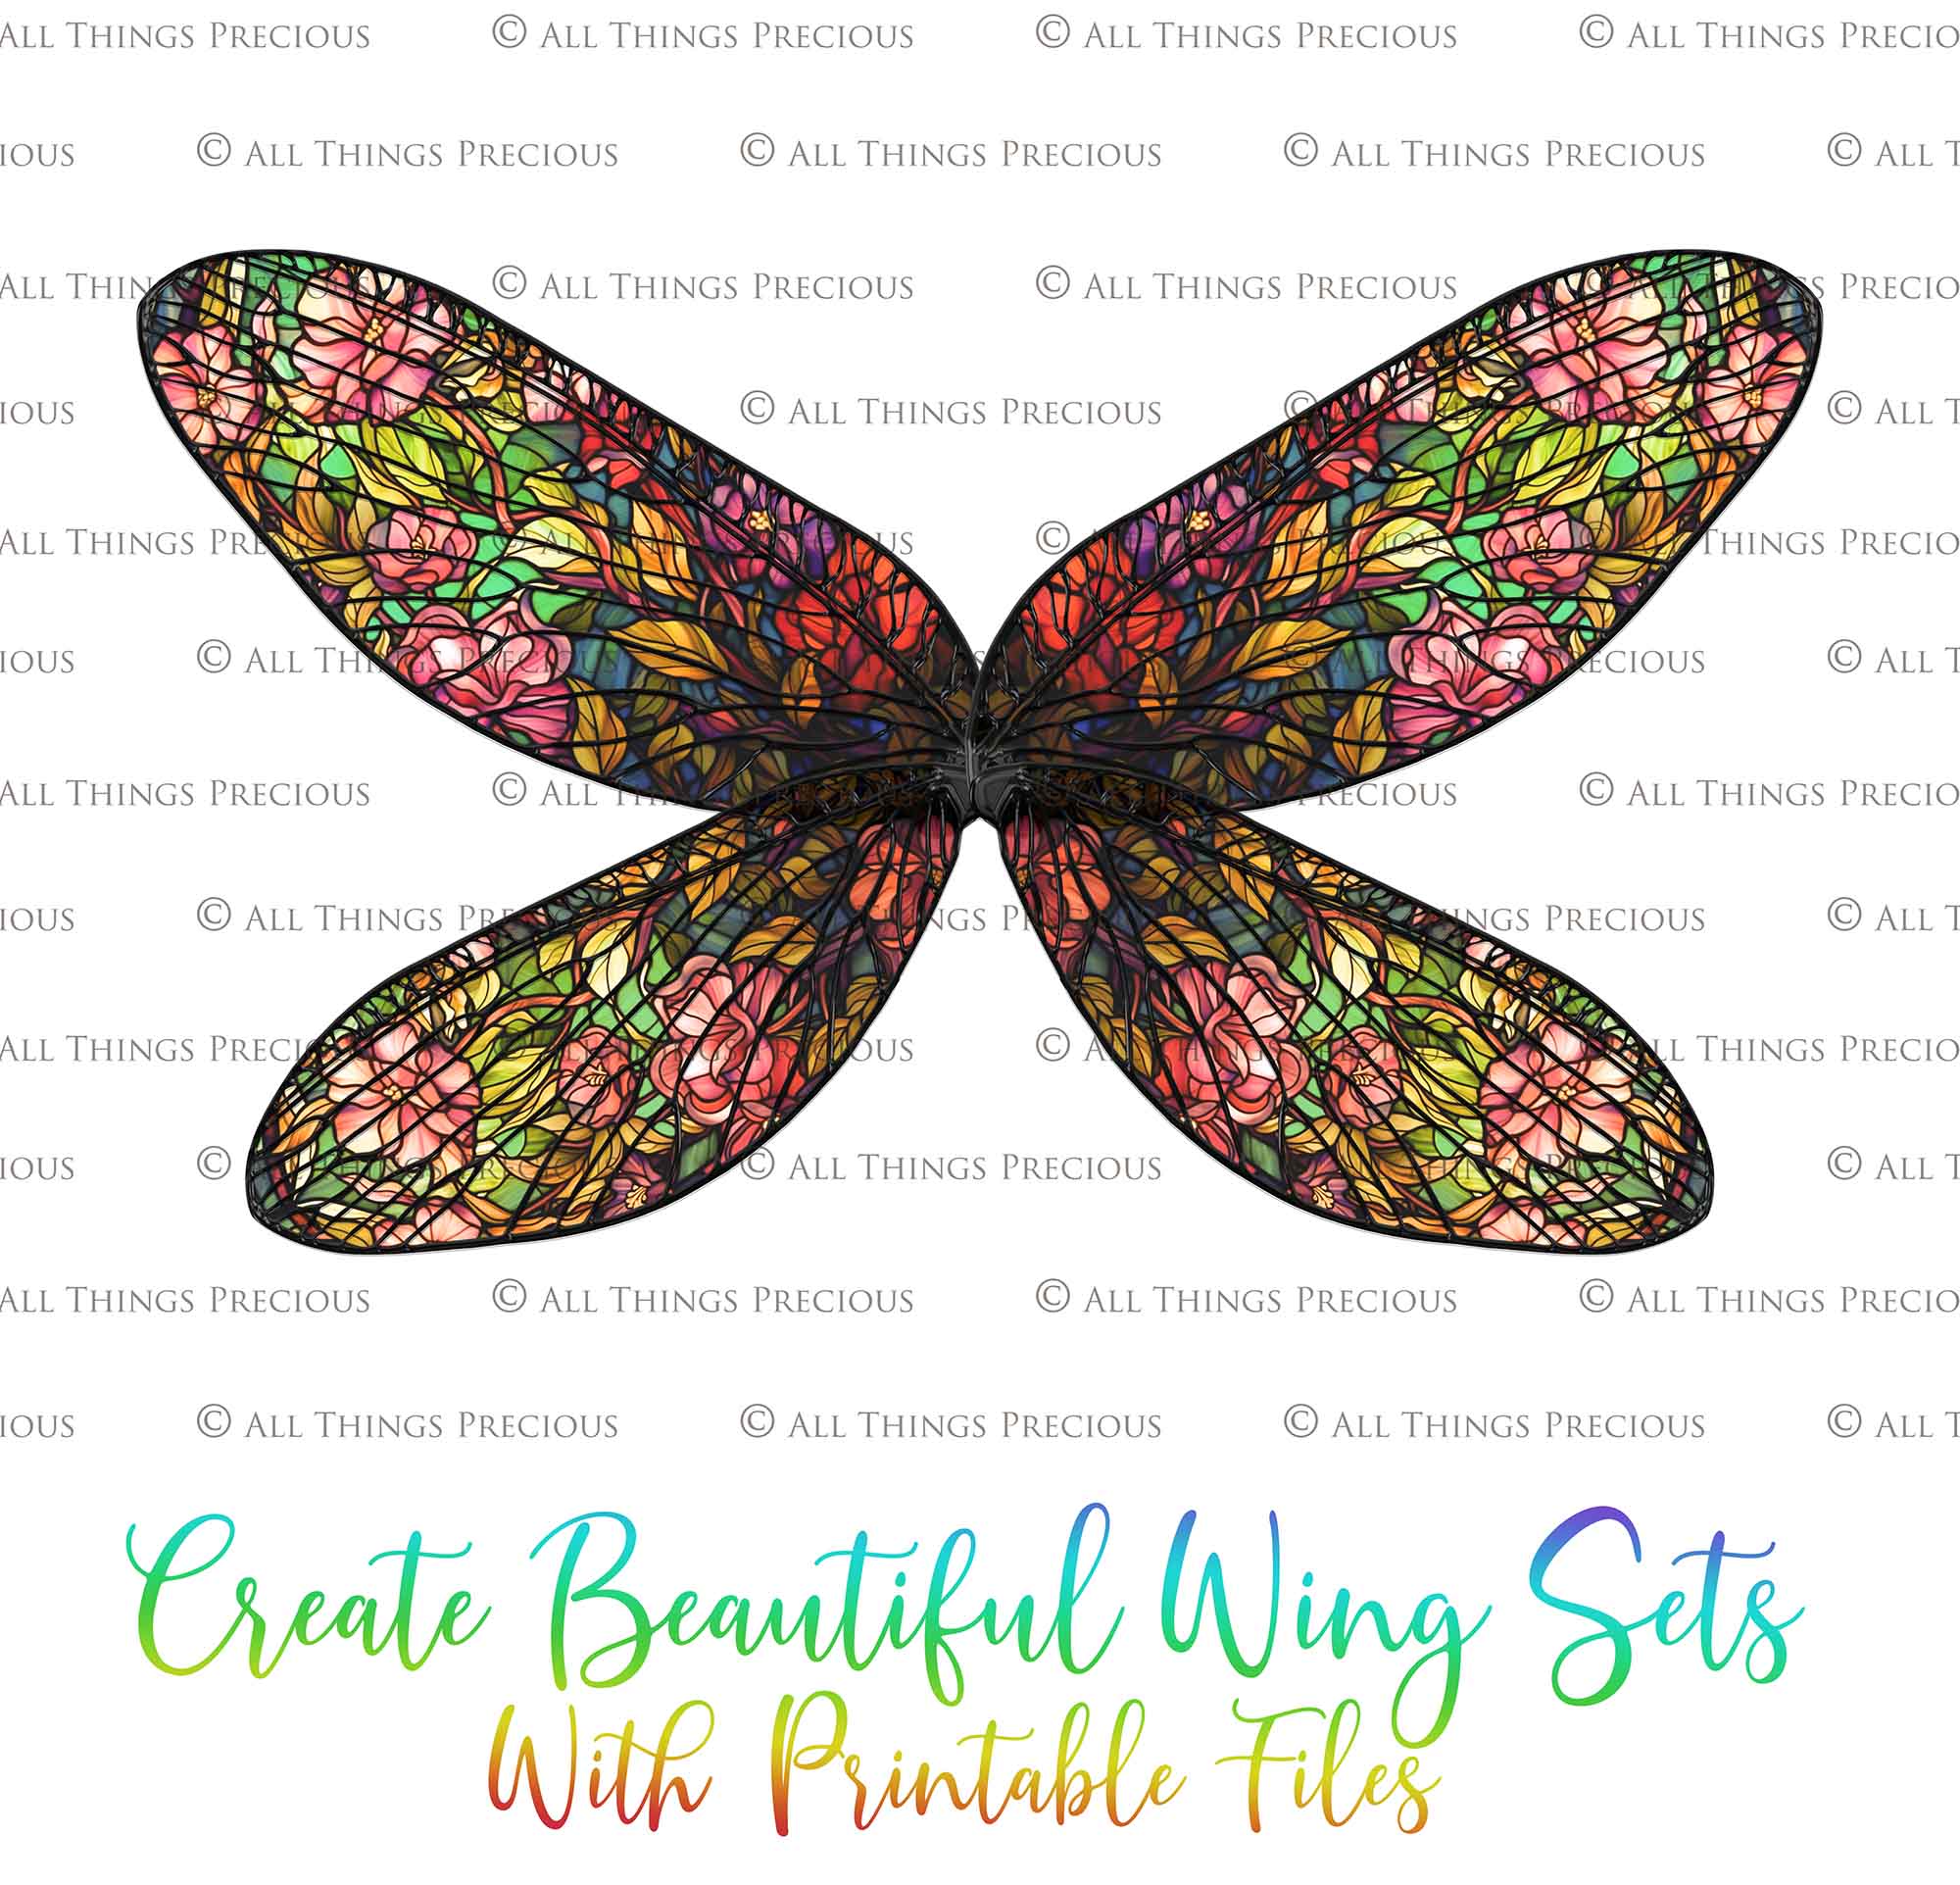 Printable Wings template. For Adult sized wings, child wings, Art dolls. Fairy wings for cosplay. Faerie fantasy, festival, halloween, Costume. Print and assemble. Pattern for making fairy wings.  High resolution Files. Png Overlays. Stained Glass.